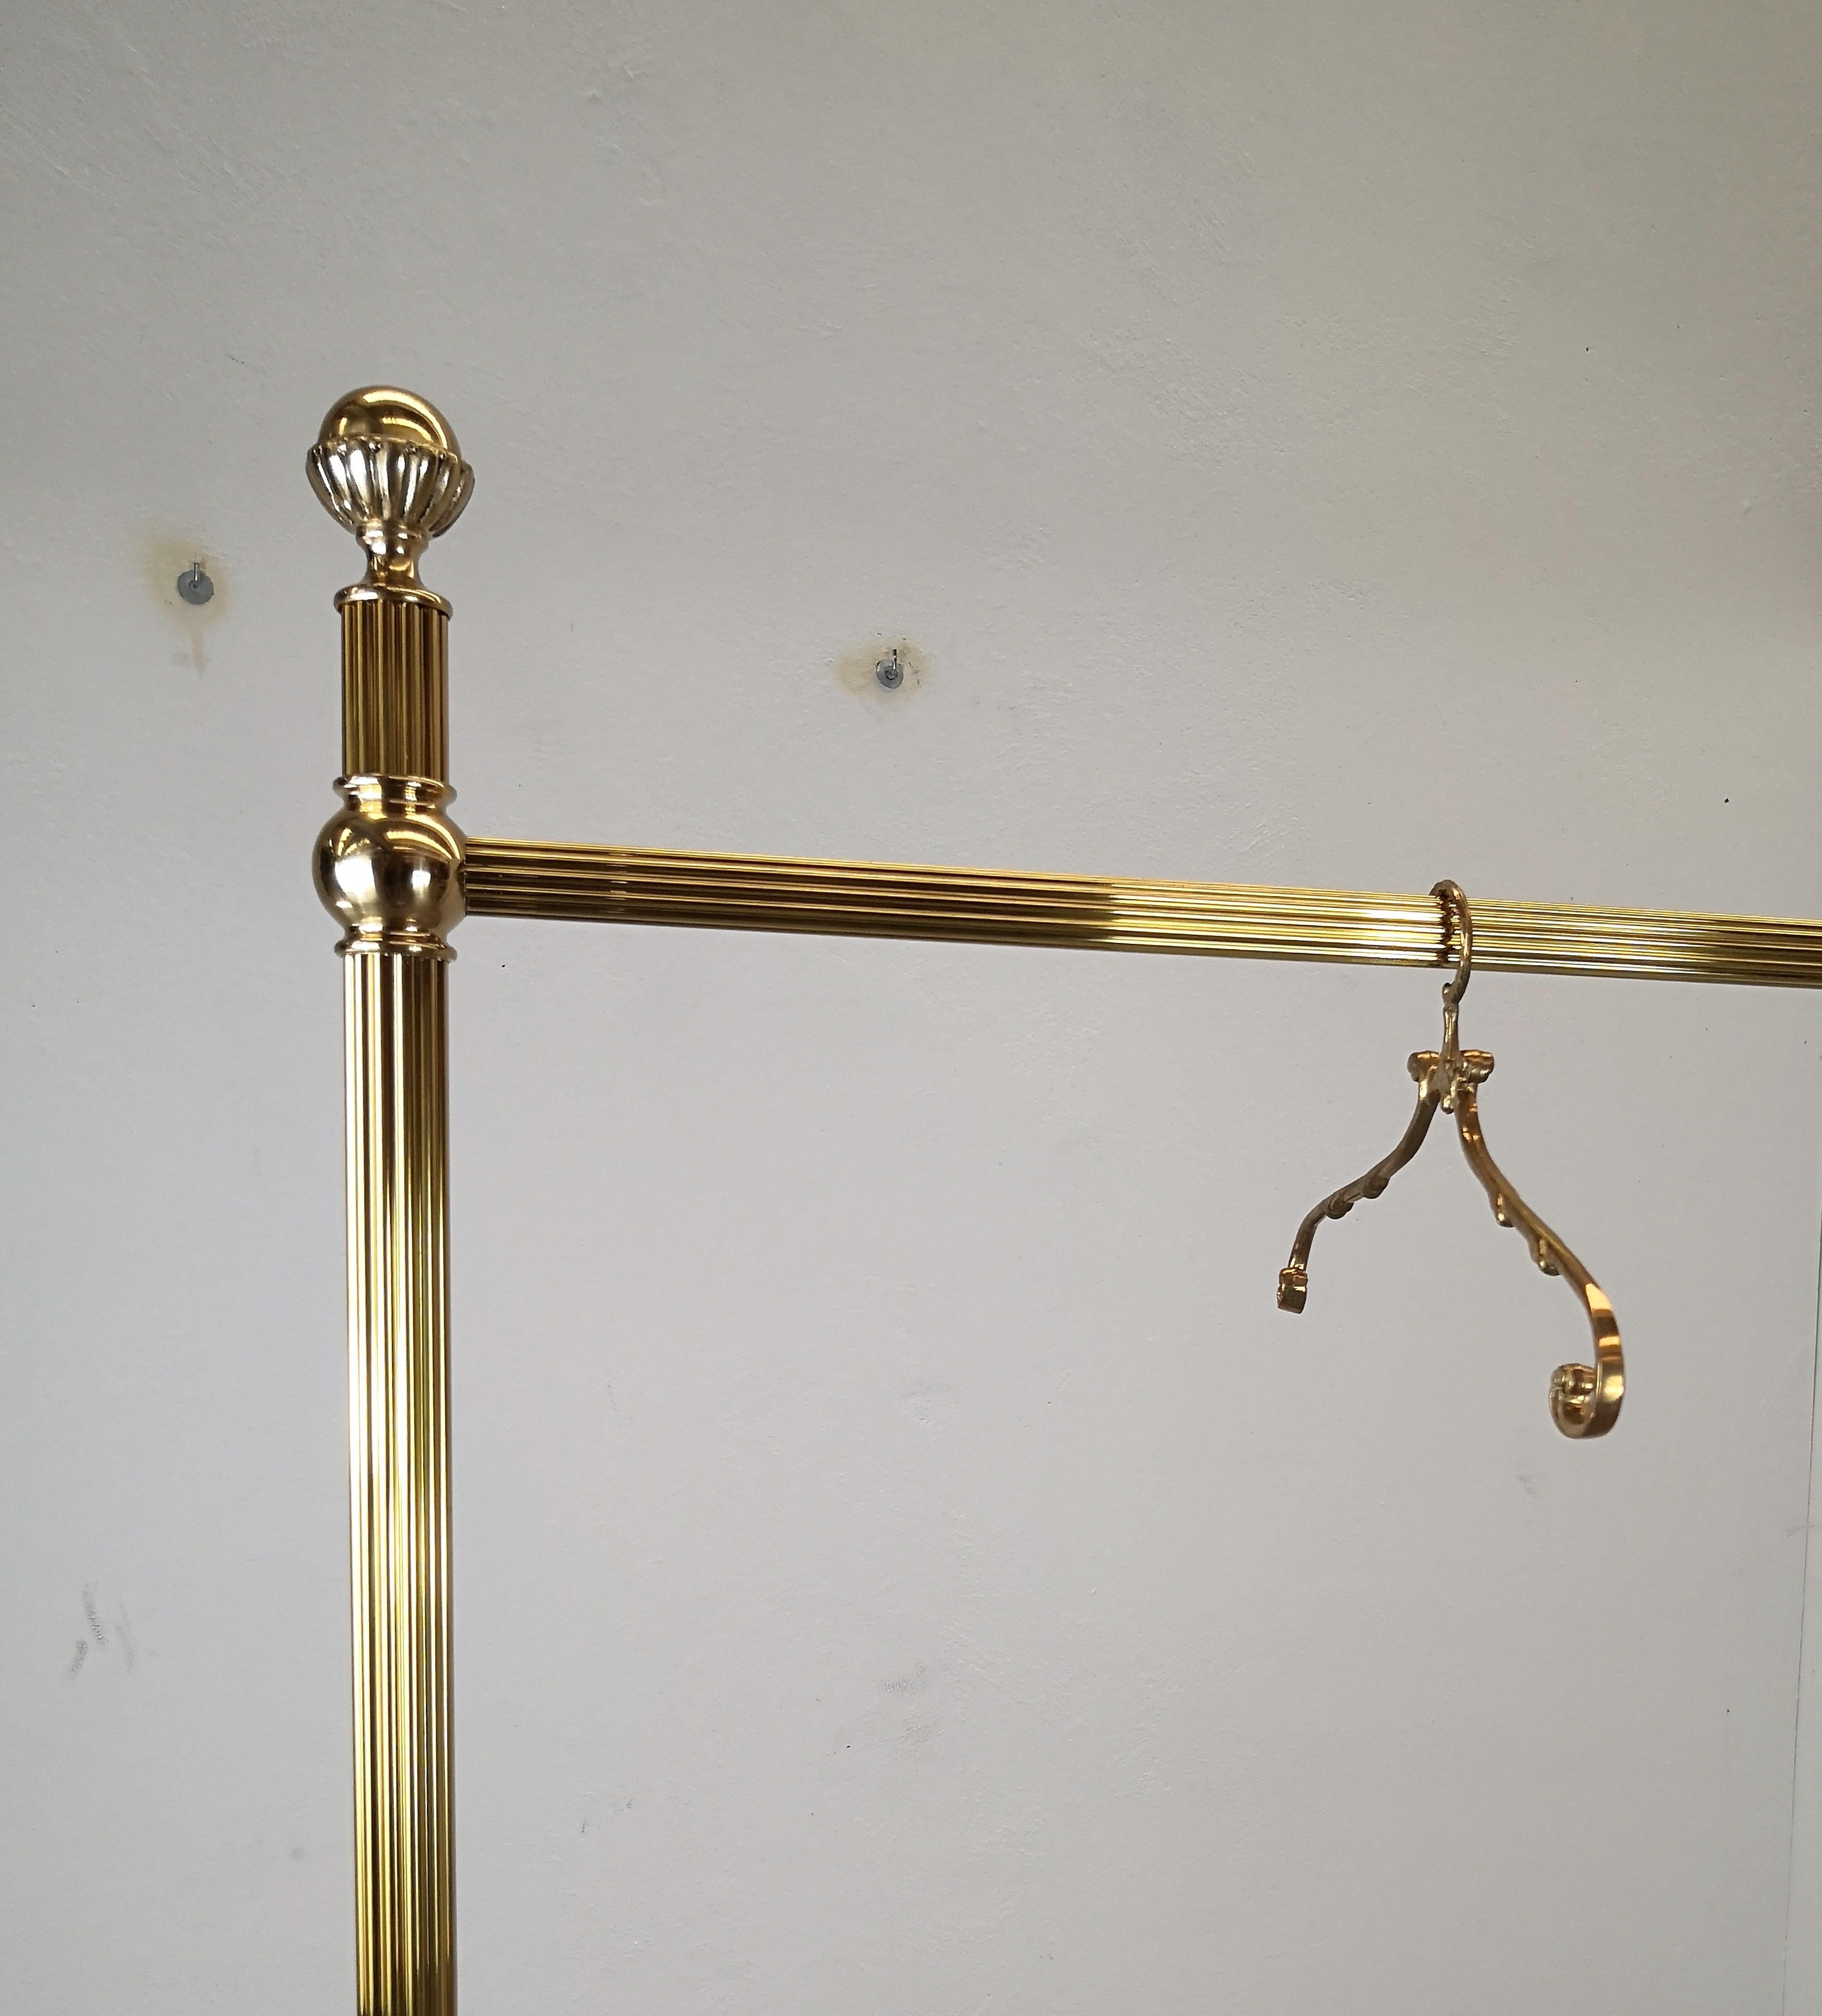 20th Century 1980s Italian Hollywood Regency Neoclassical Solid Brass Coat Hangers For Sale